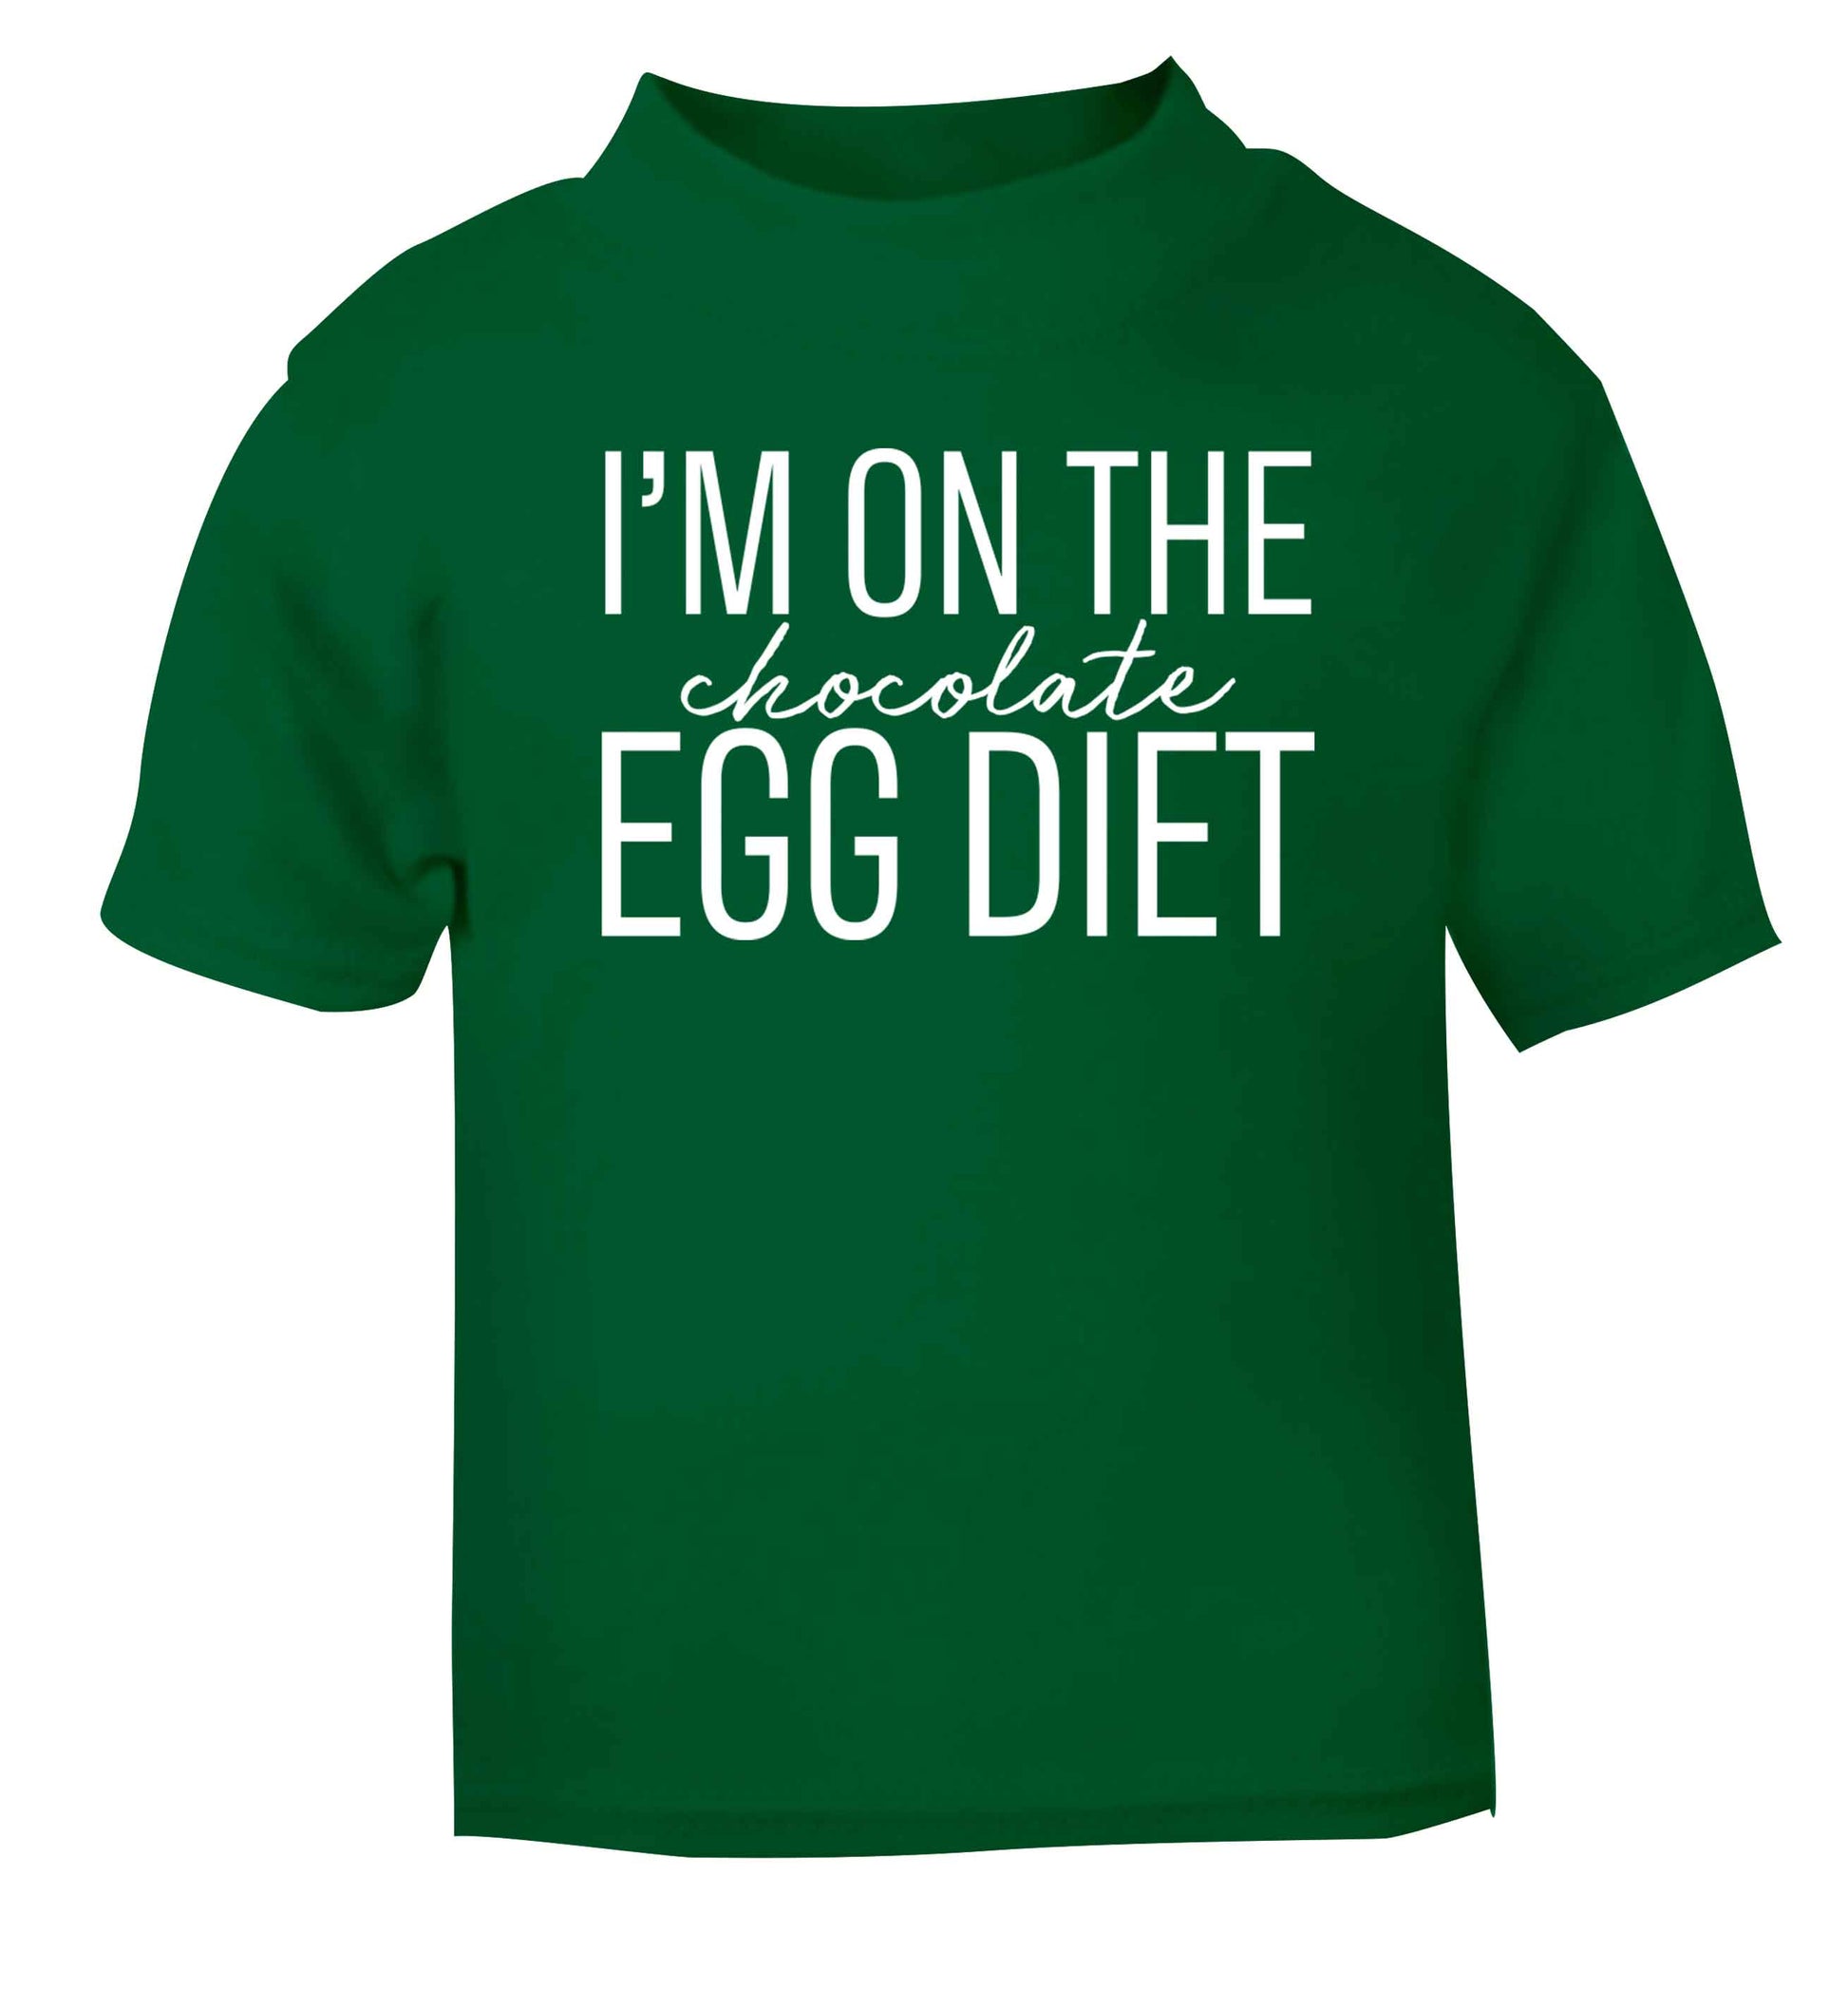 I'm on the chocolate egg diet green baby toddler Tshirt 2 Years